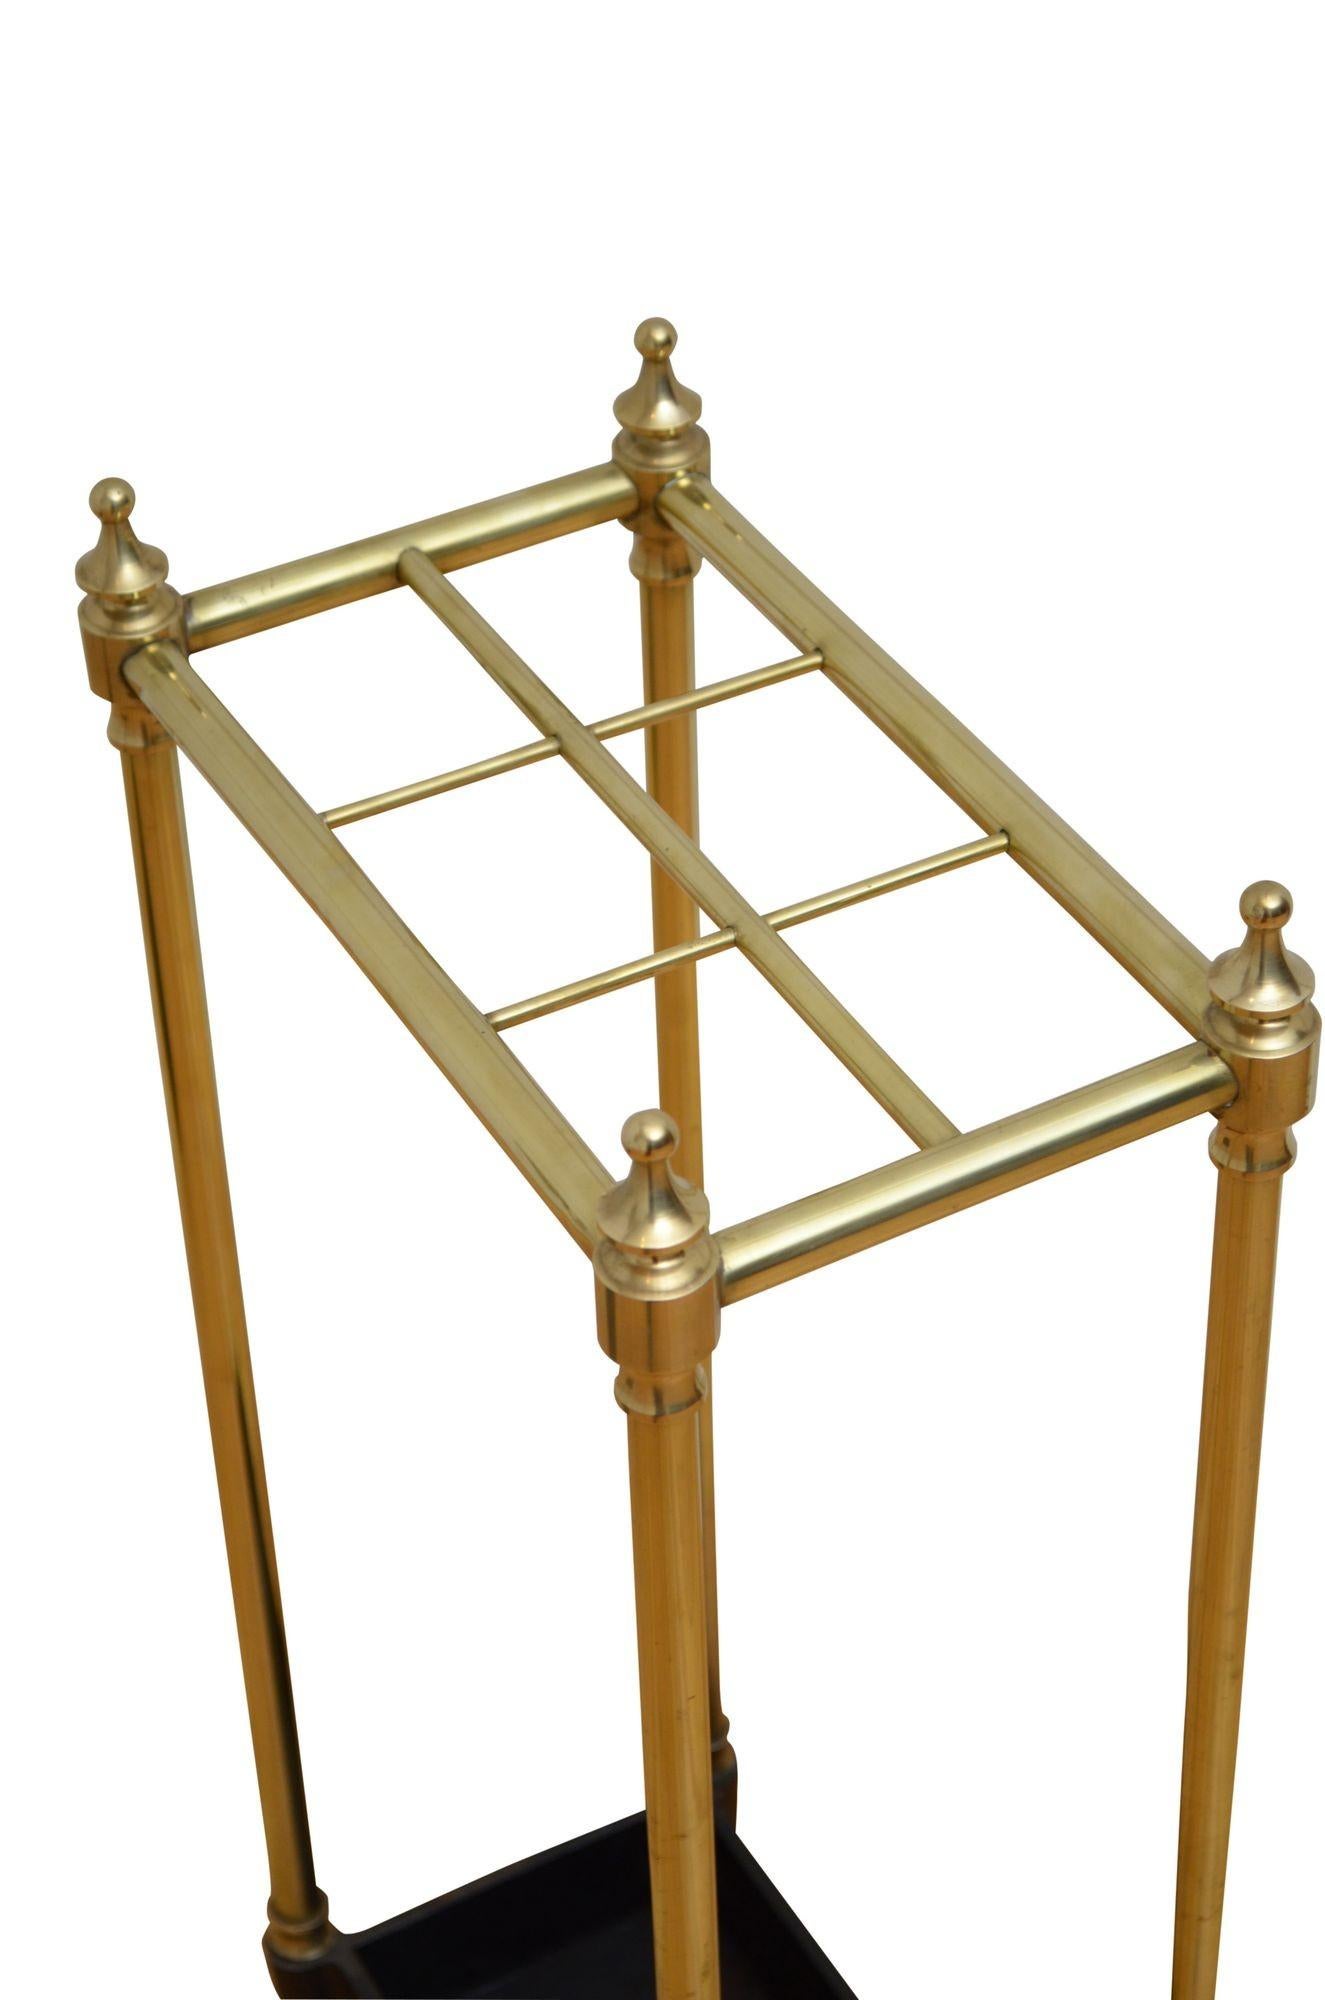 P0268 Elegant brass umbrella stand with six compartments, four decorative finials and cast iron drip tray. This antique umbrella stand has been gently cleaned and polished, all in home ready condition. UK delivery included. c1890
H25.5